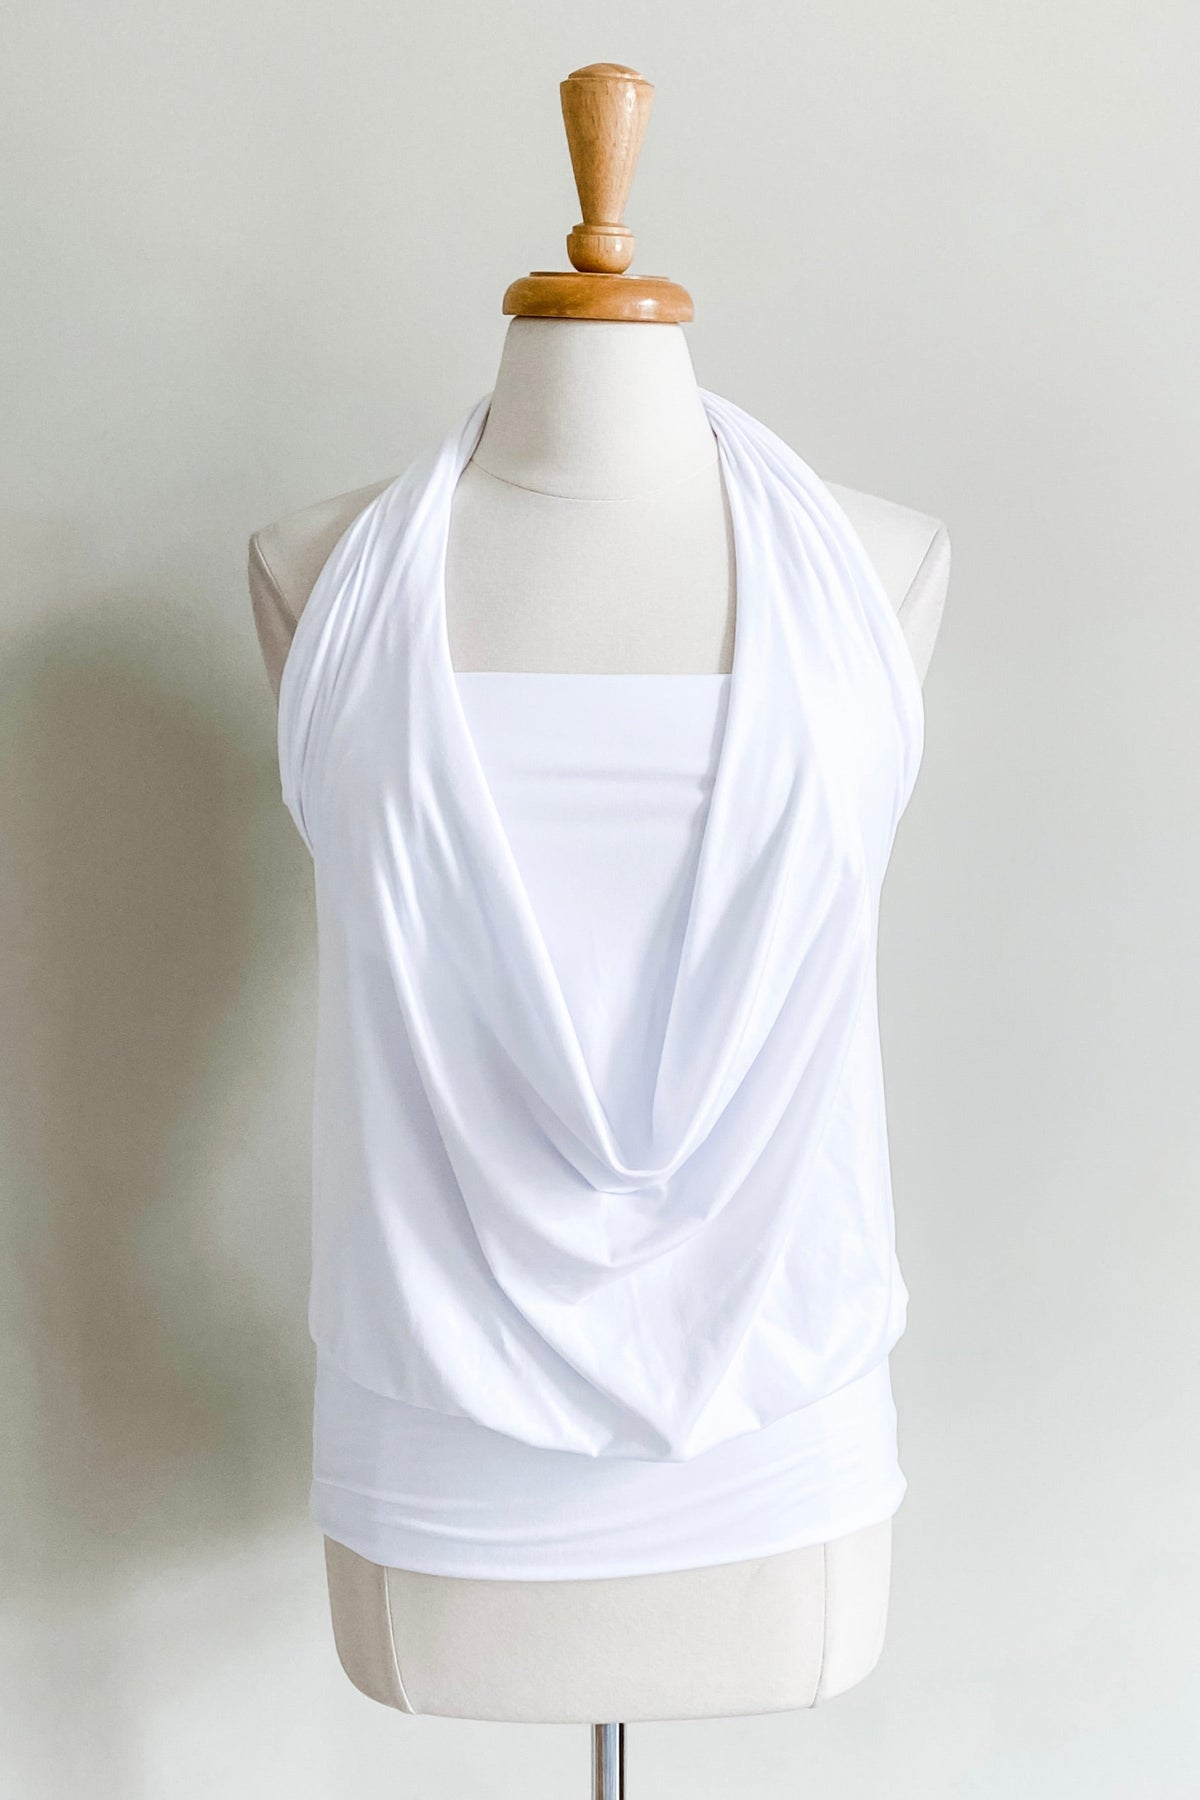 Diane Kroe One-4-All Top (White) - Warm Weather Capsule Collection 